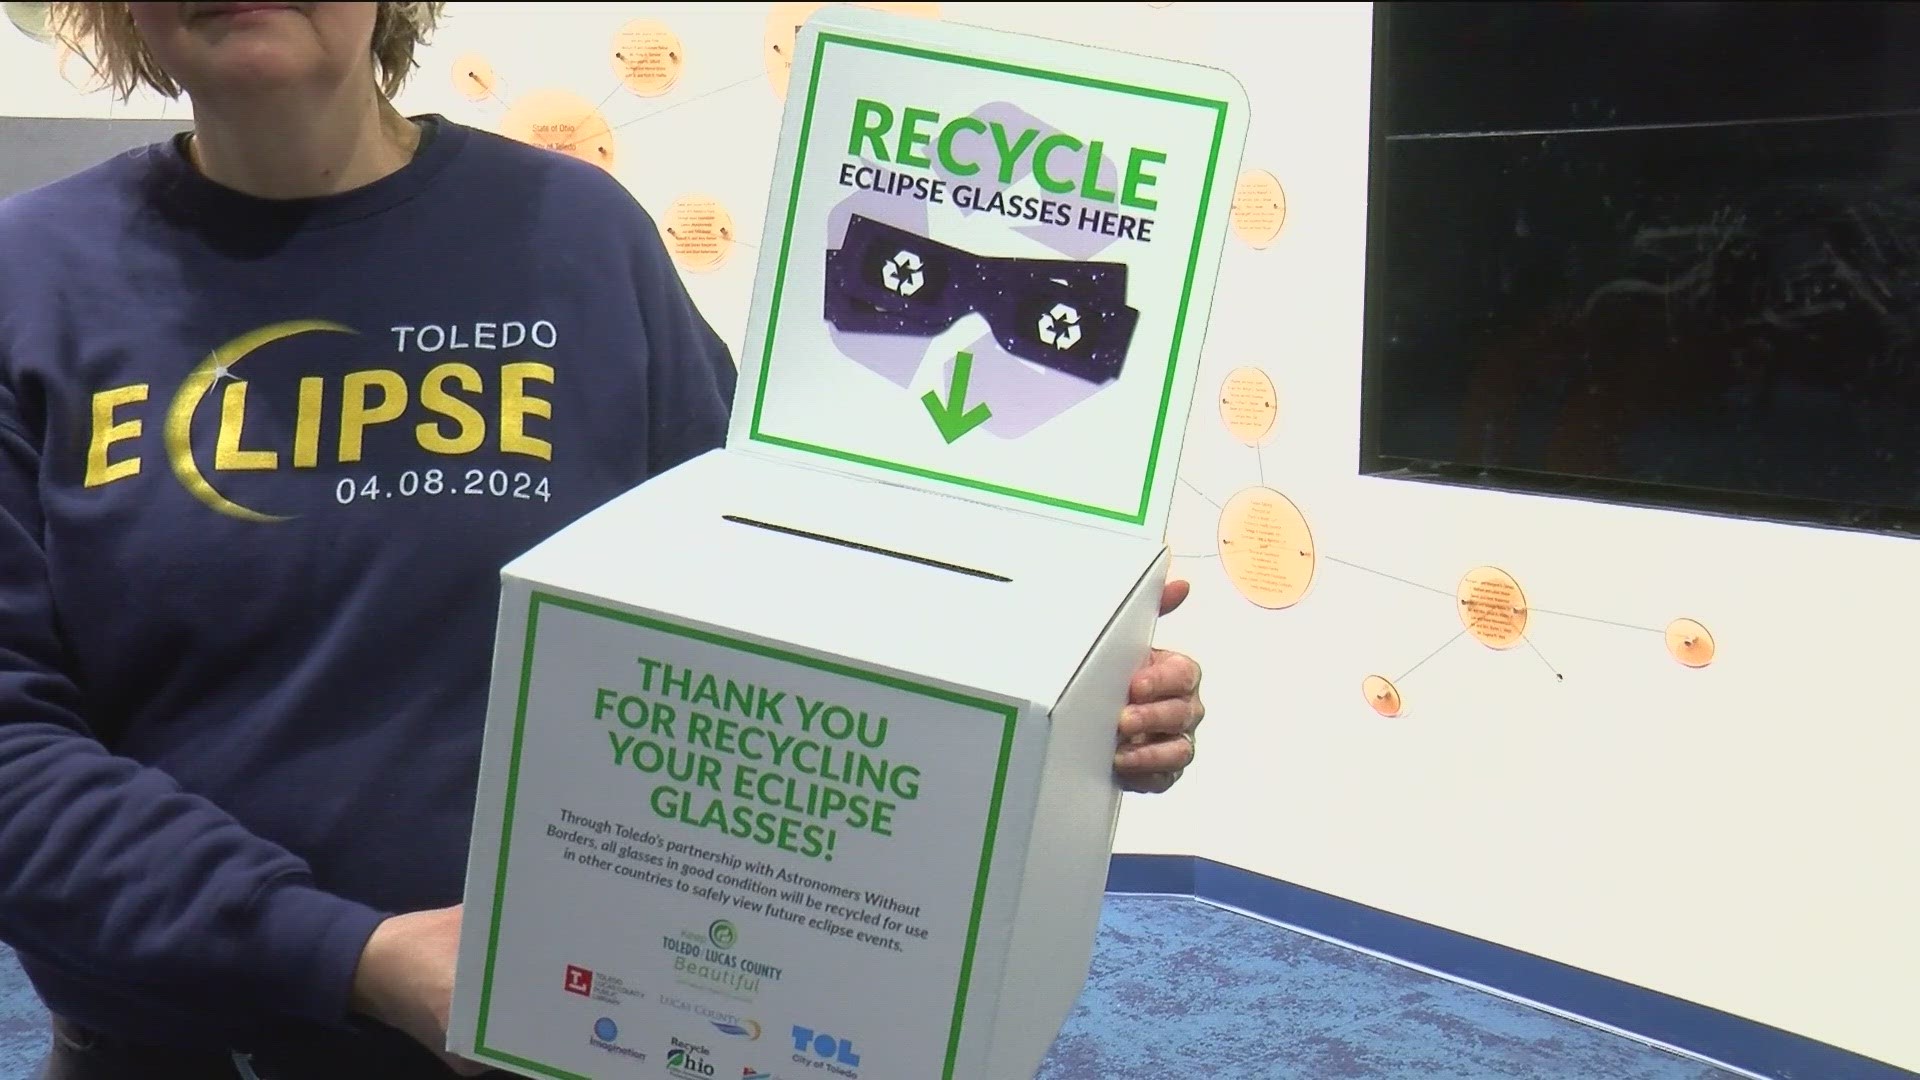 Local organizations are accepting glasses for recycling.